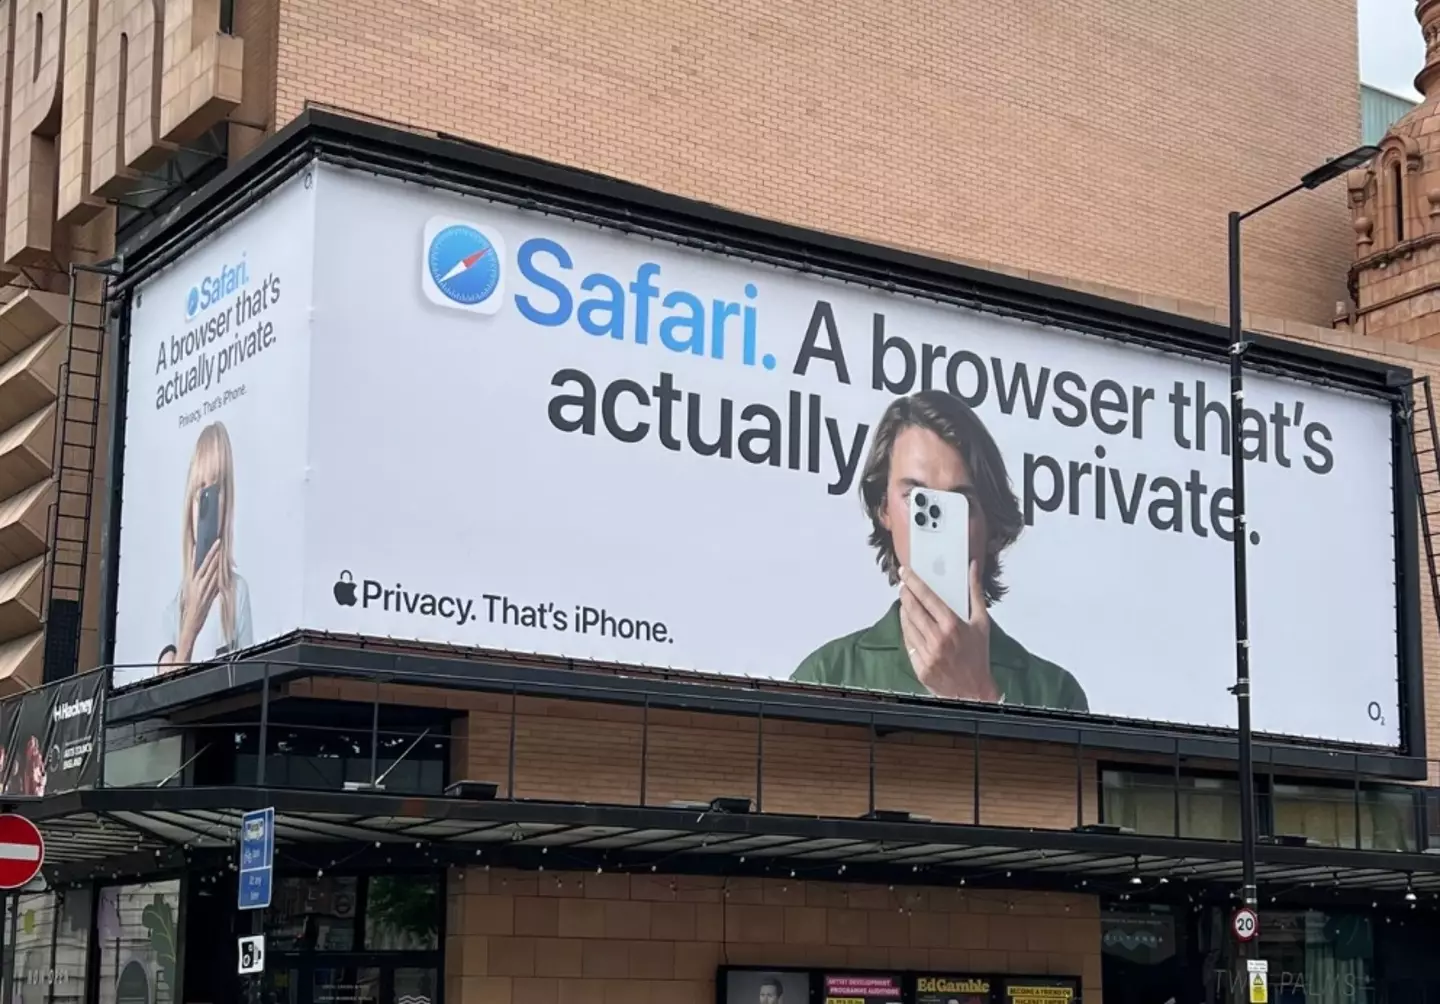 The billboard has been spotted all over the world. (X/PrivacyMatters)